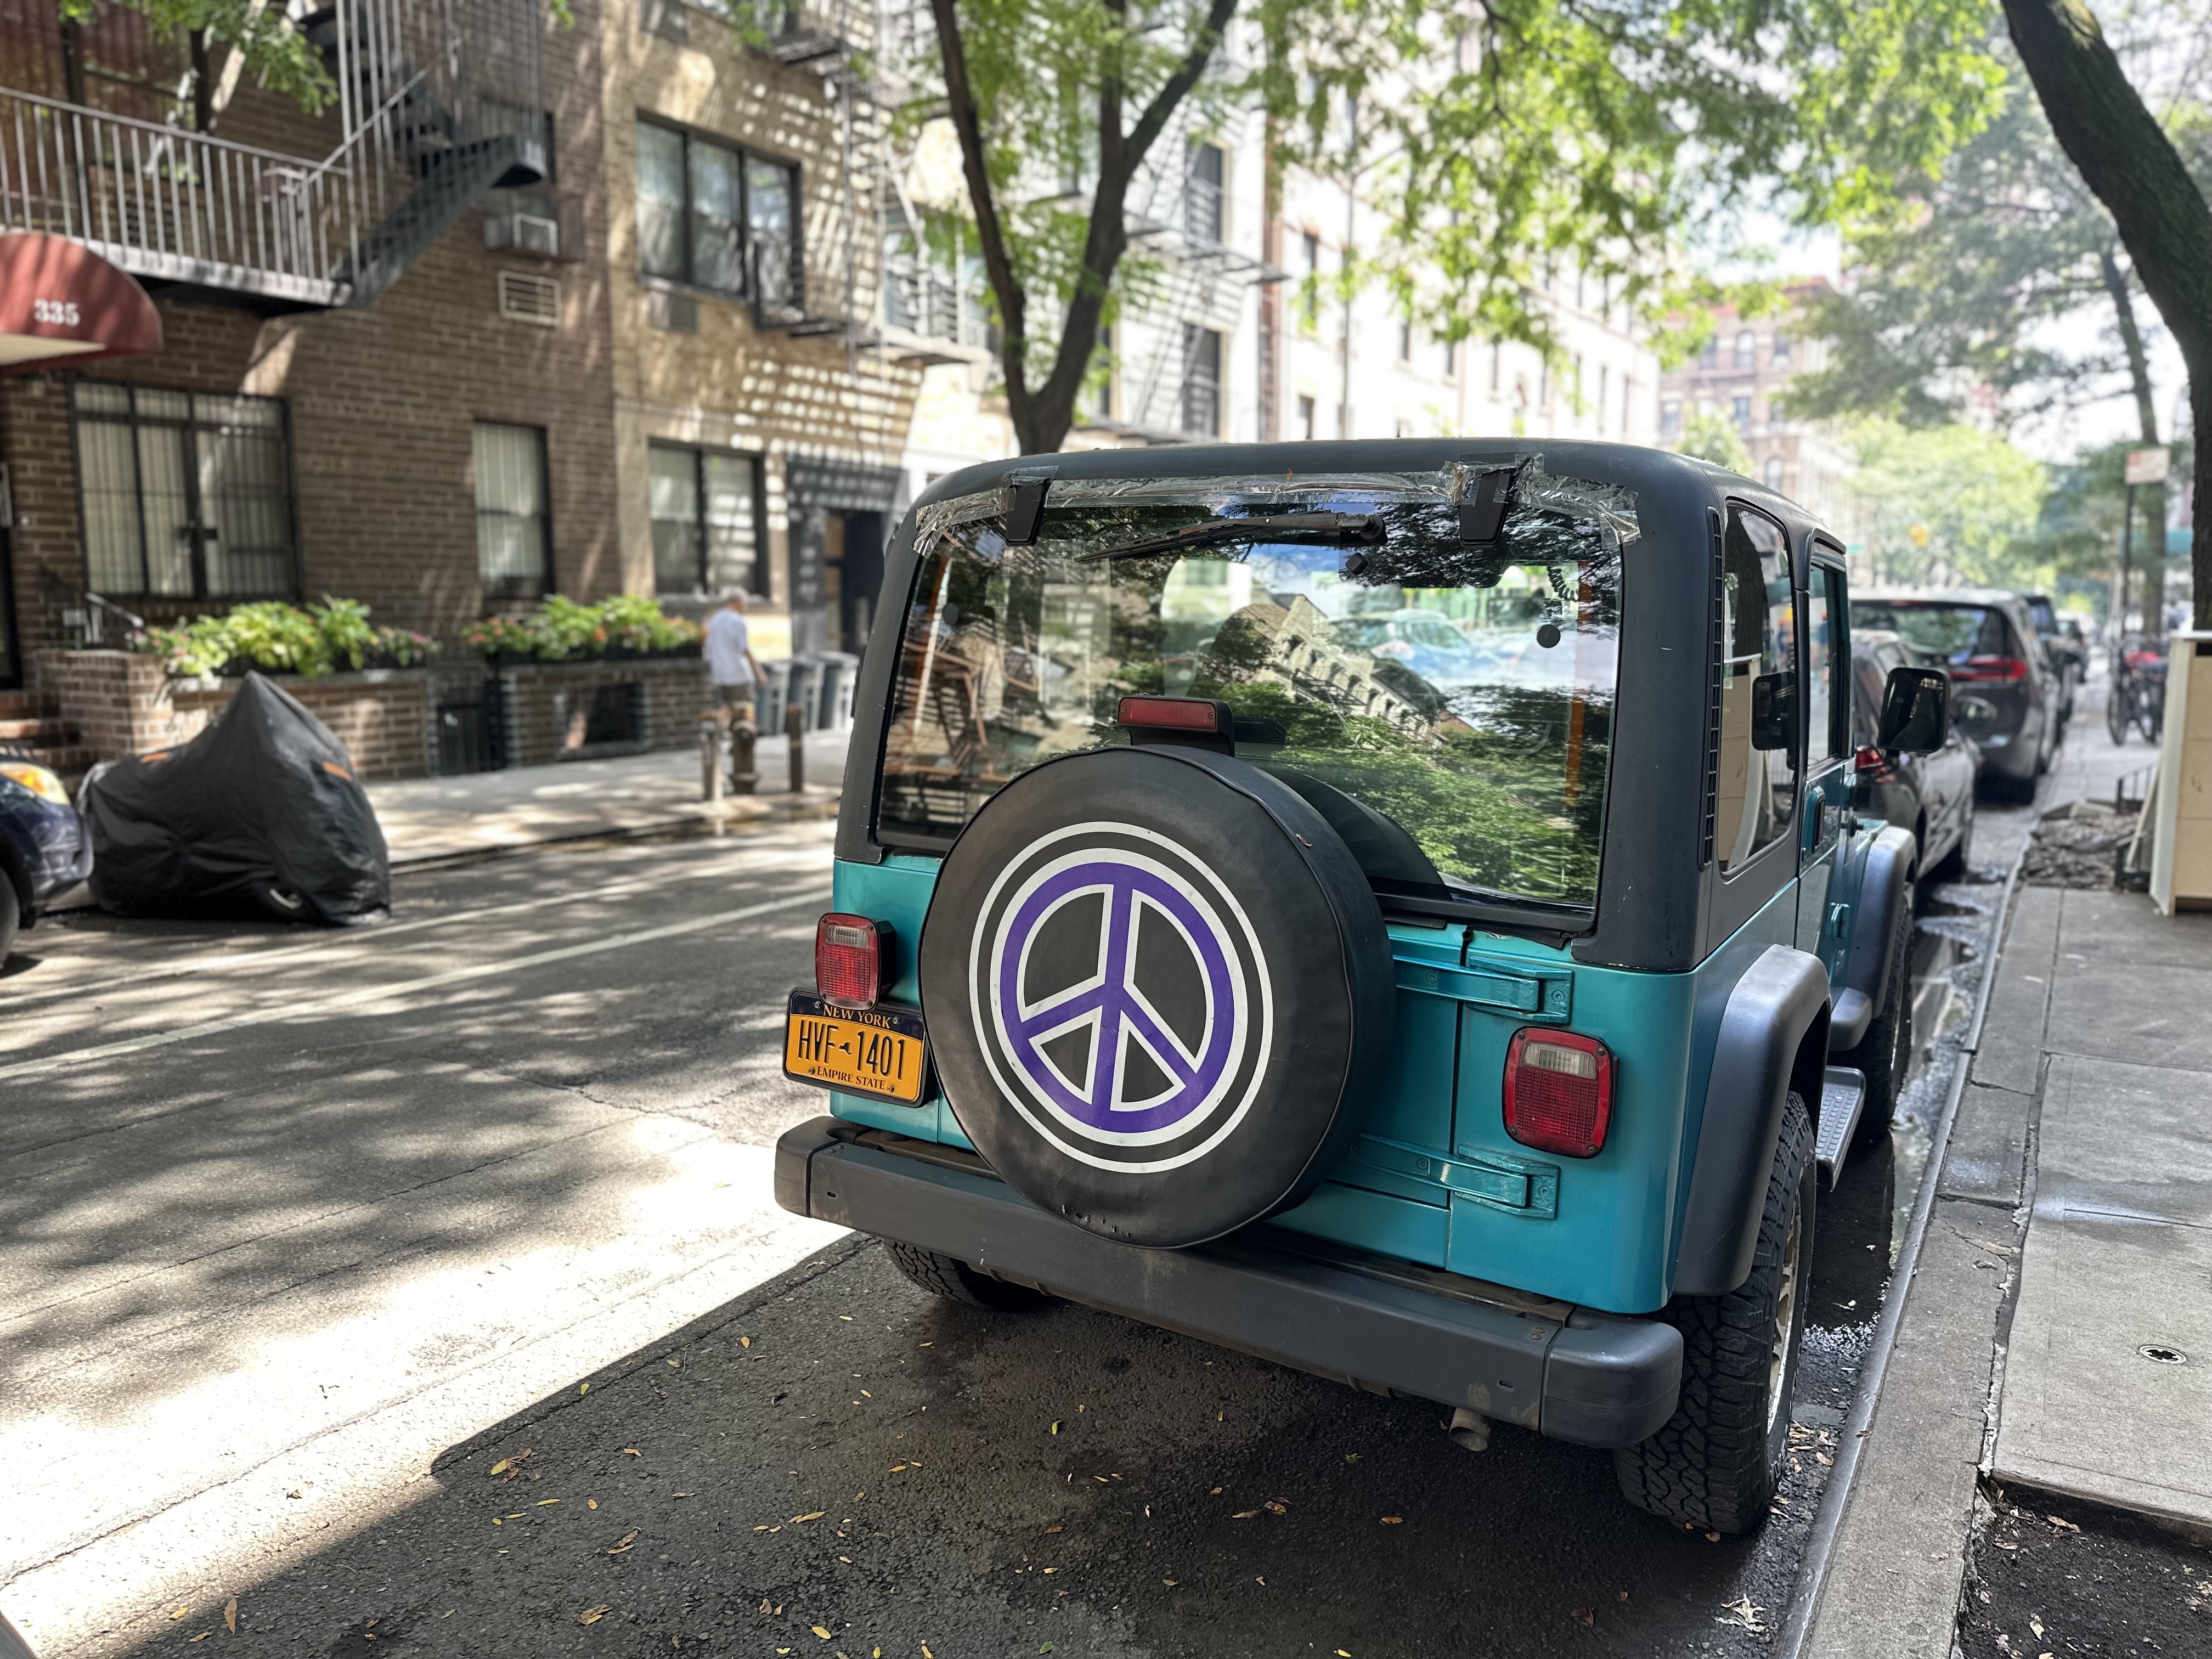 This car's tire cover on E90th Street carries a peace symbol. 